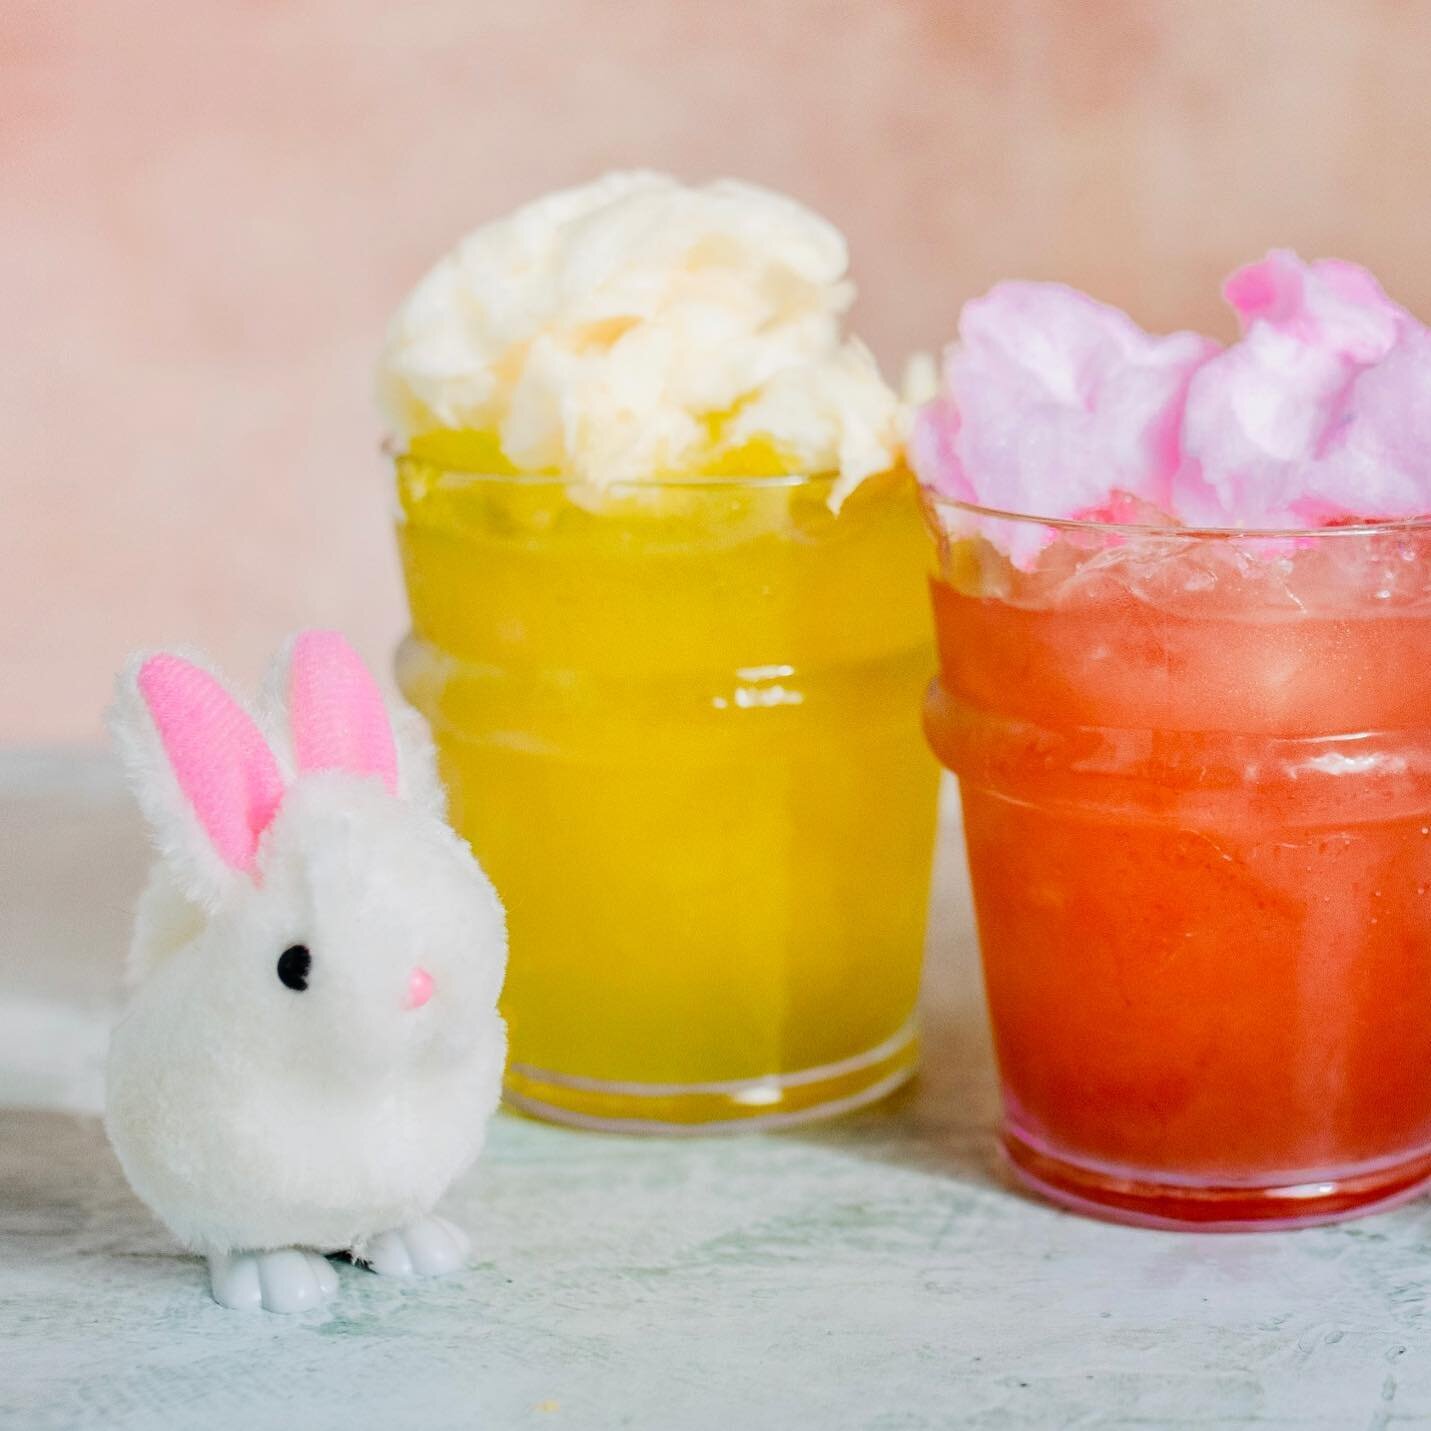 🍸🐣🐇Happy Easter! 🐇🐣🍸
Somebunny is having cotton candy cocktails all day 😏